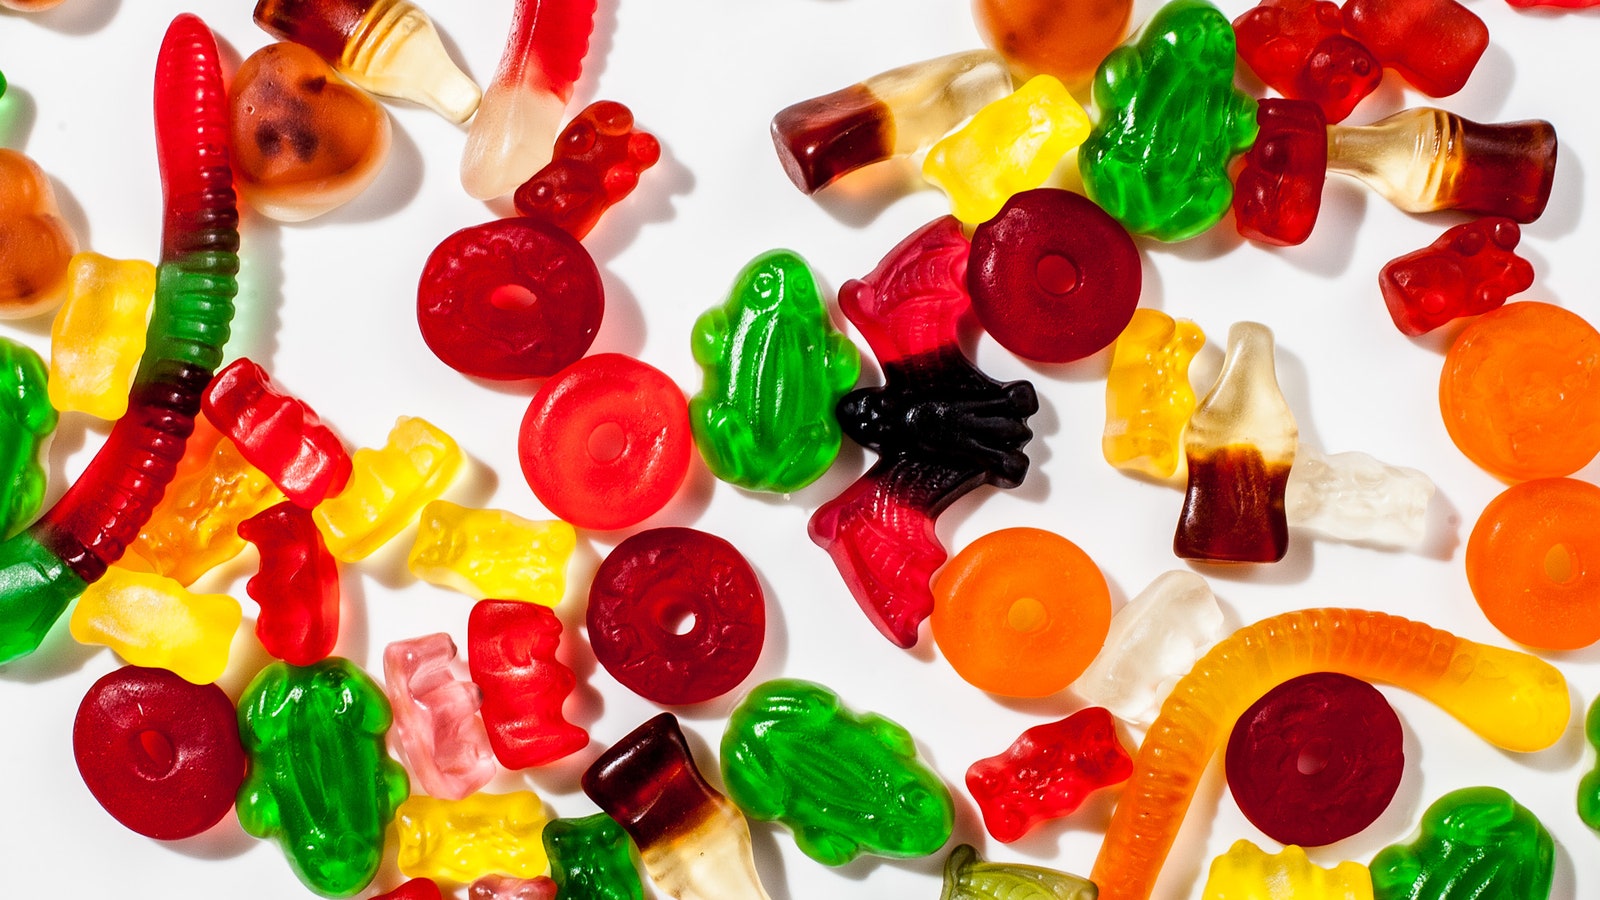 Things You Should Know Before Buying These Libido Gummies